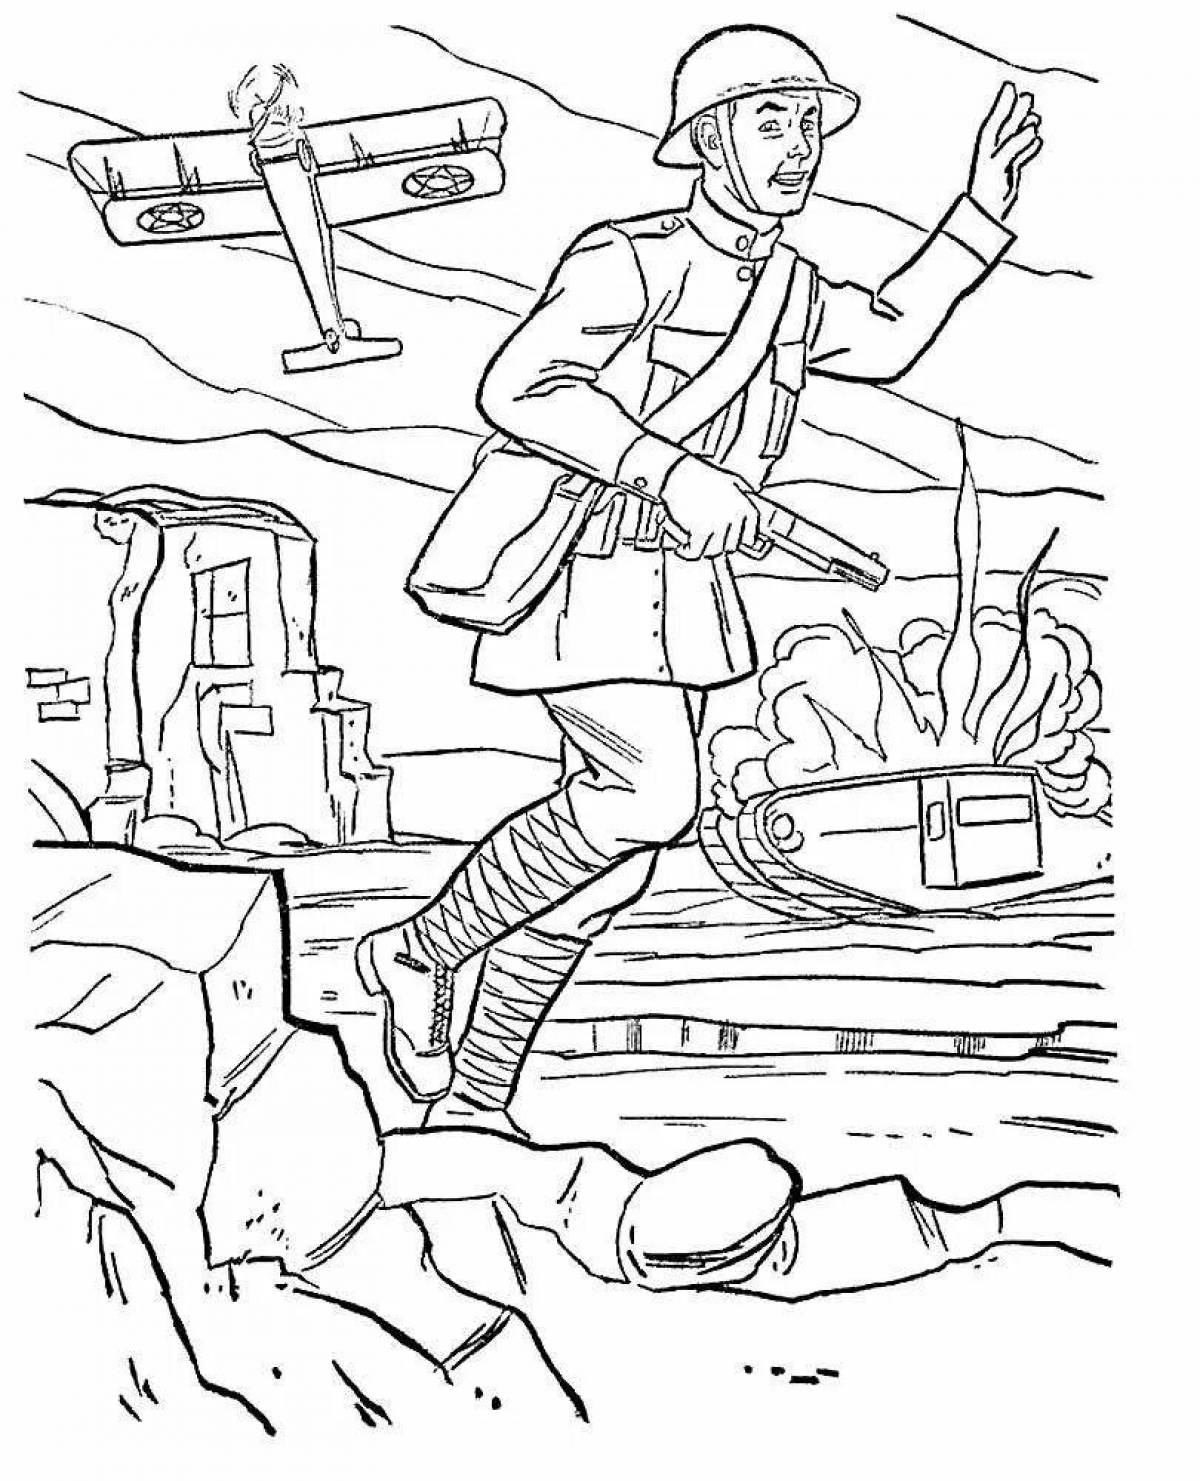 Bold children's military coloring book